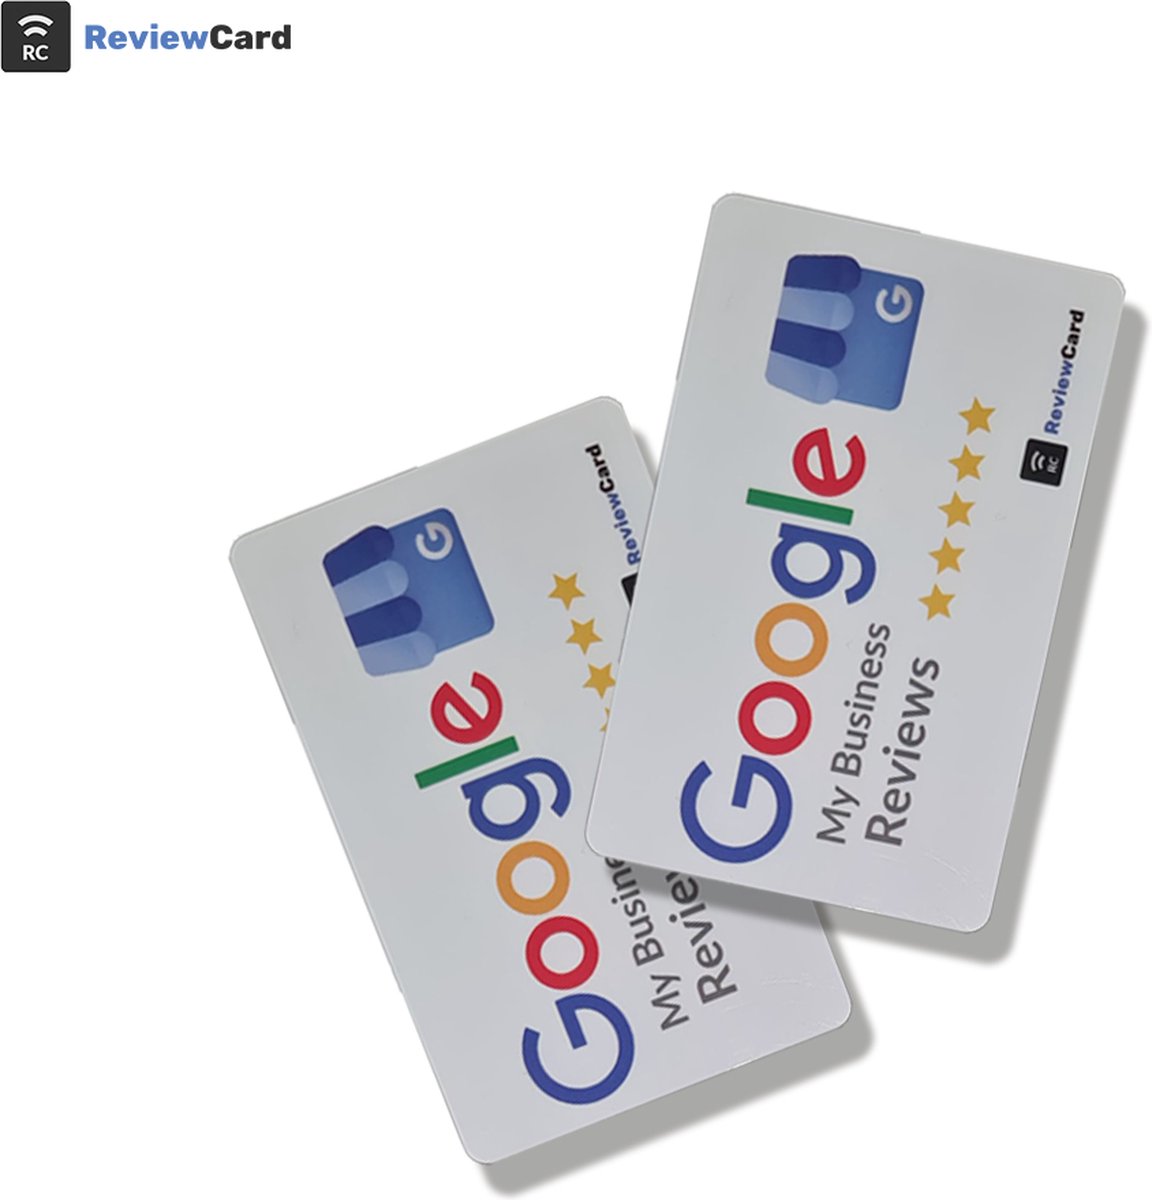 Review Card - Google Review Kaart - Boost je reviews - Google - Google Review - NFC Sticker - NFC card - NFC kaart - NFC